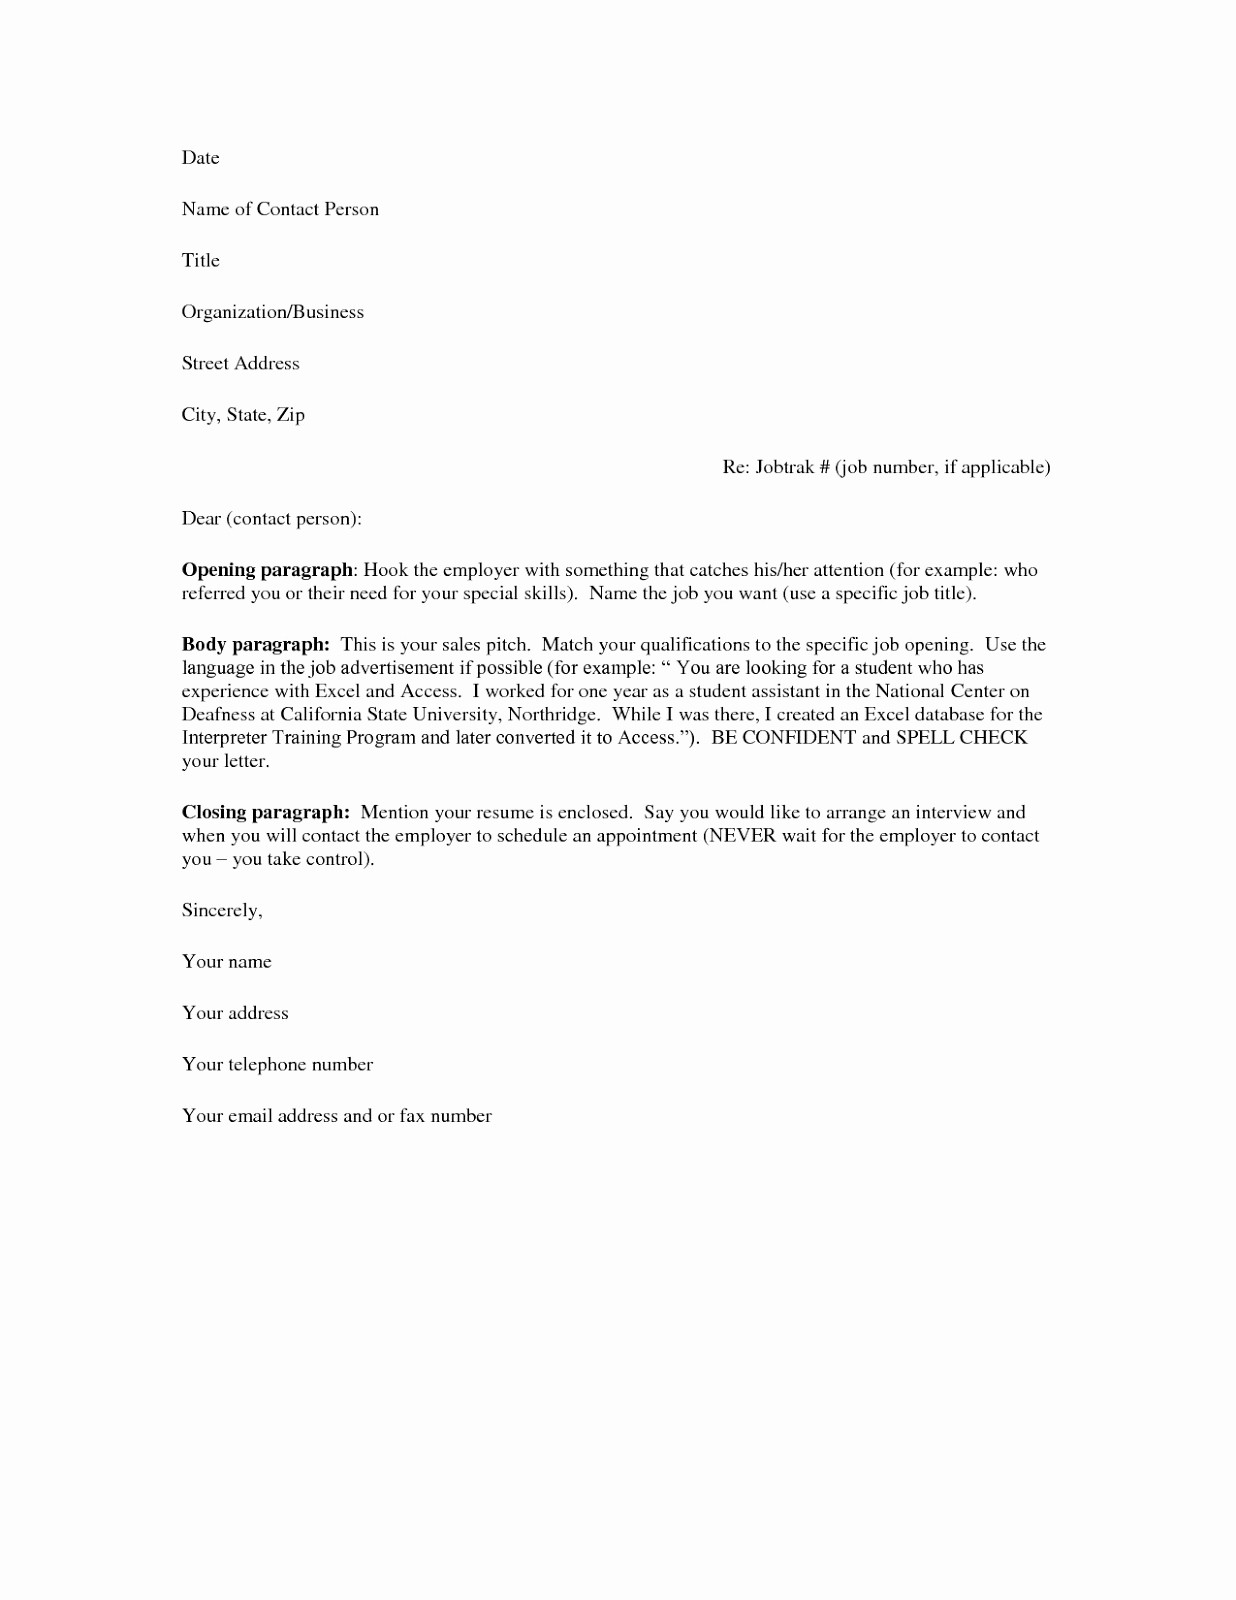 Resume and Cover Letter Templates Elegant Free Cover Letter Samples for Resumes